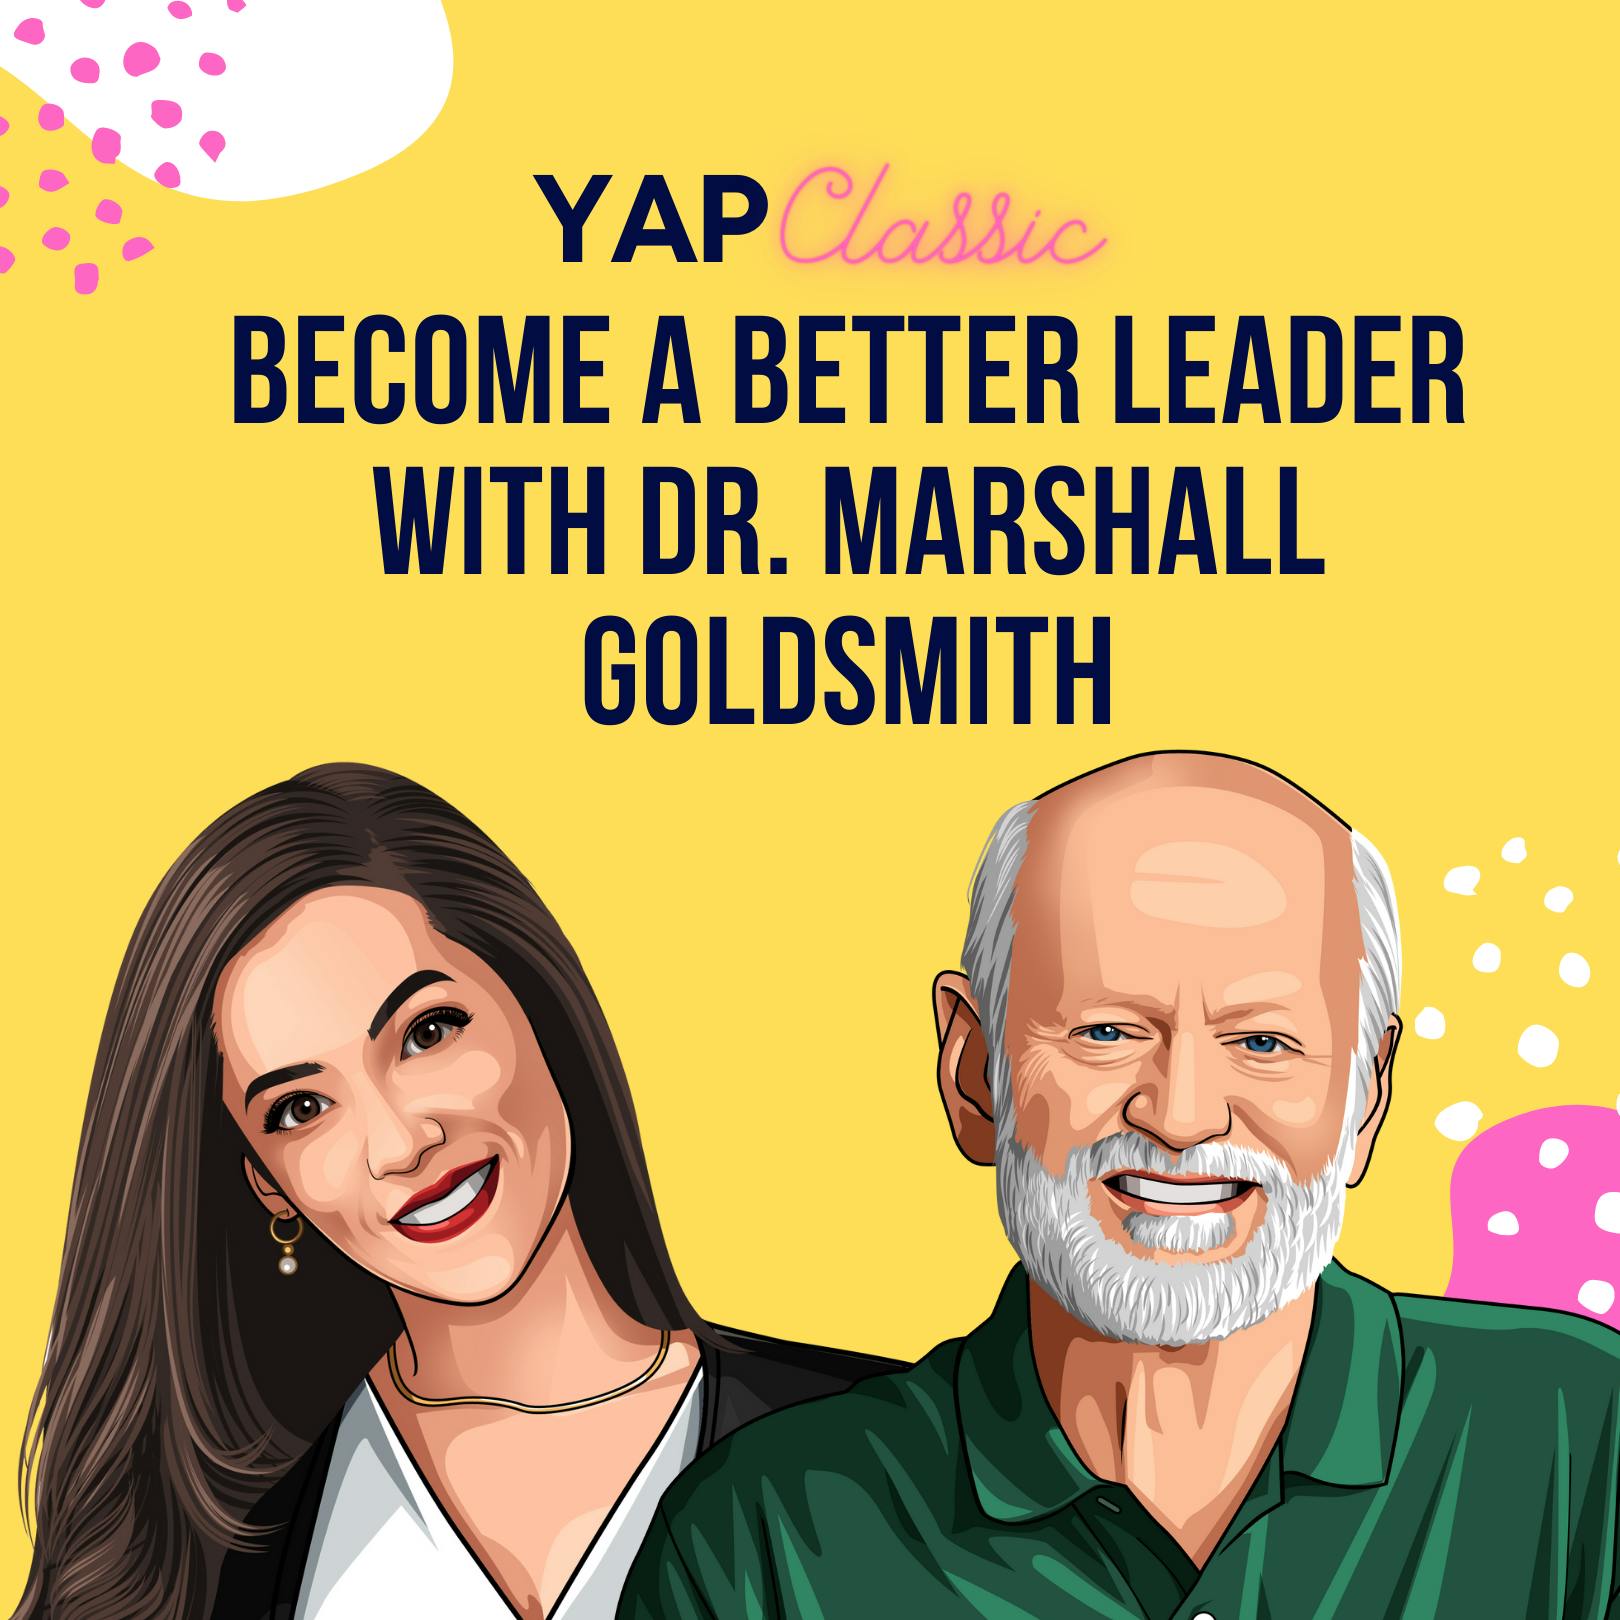 #YAPClassic Become a Better Leader with Dr. Marshall Goldsmith